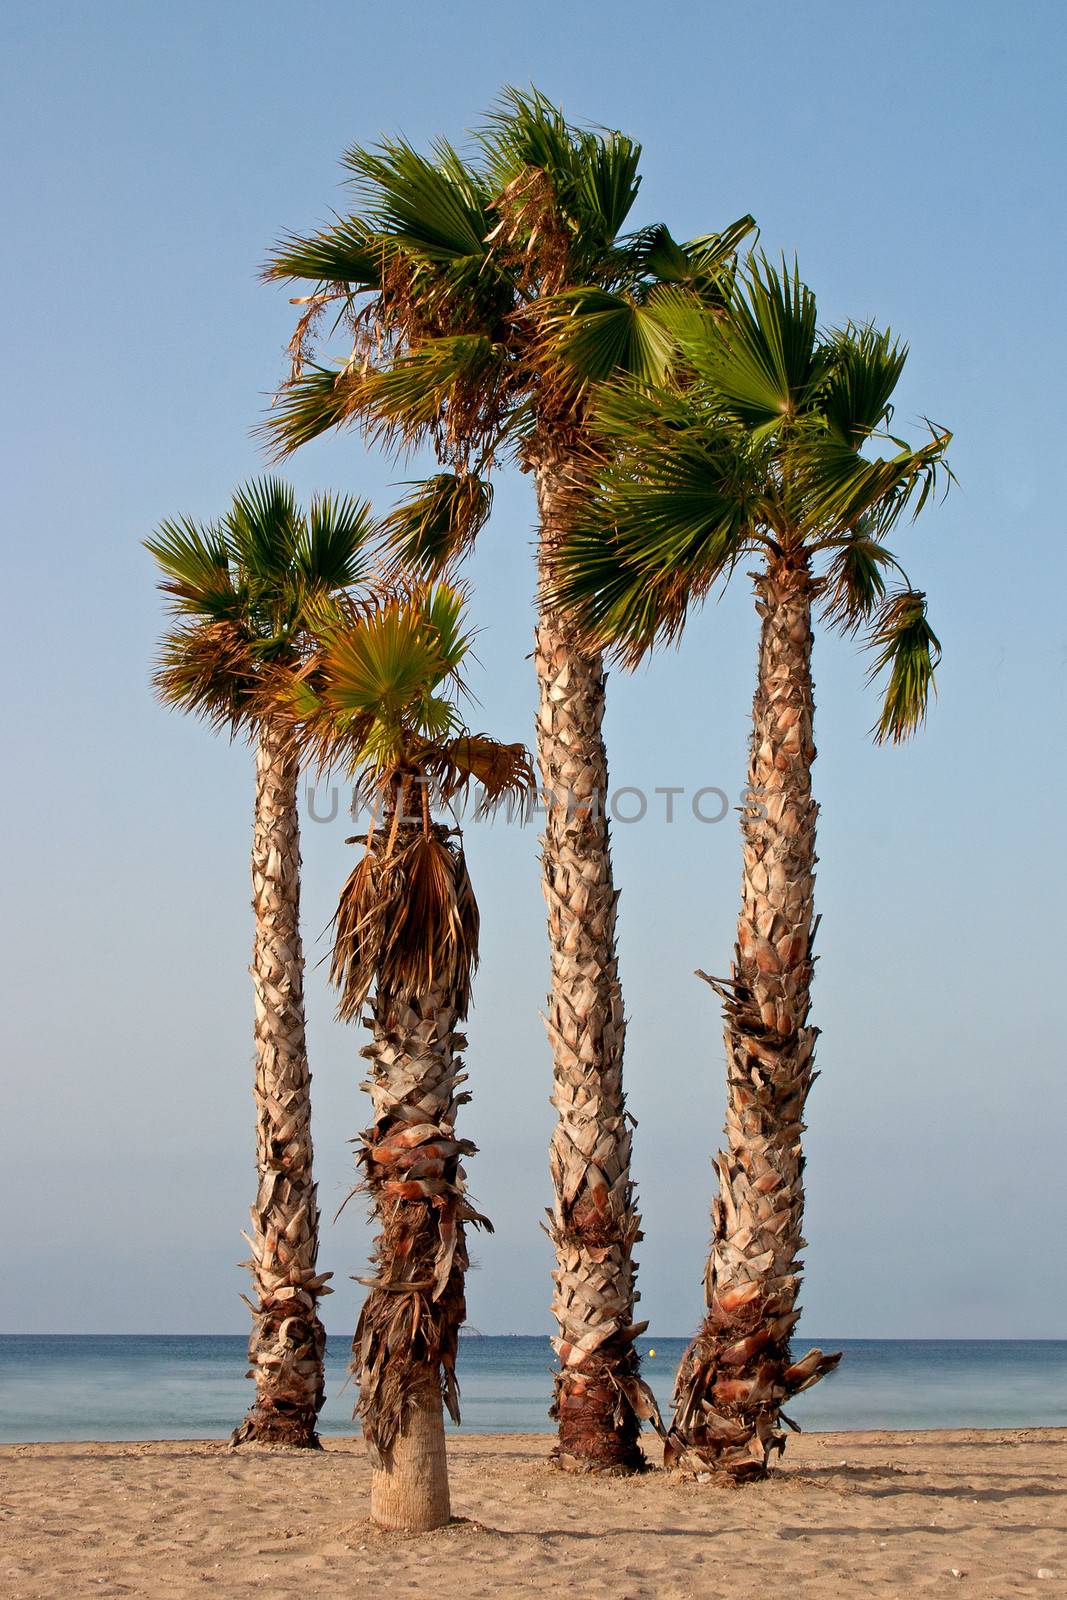 Four Palmtrees at the beach by Kartouchken